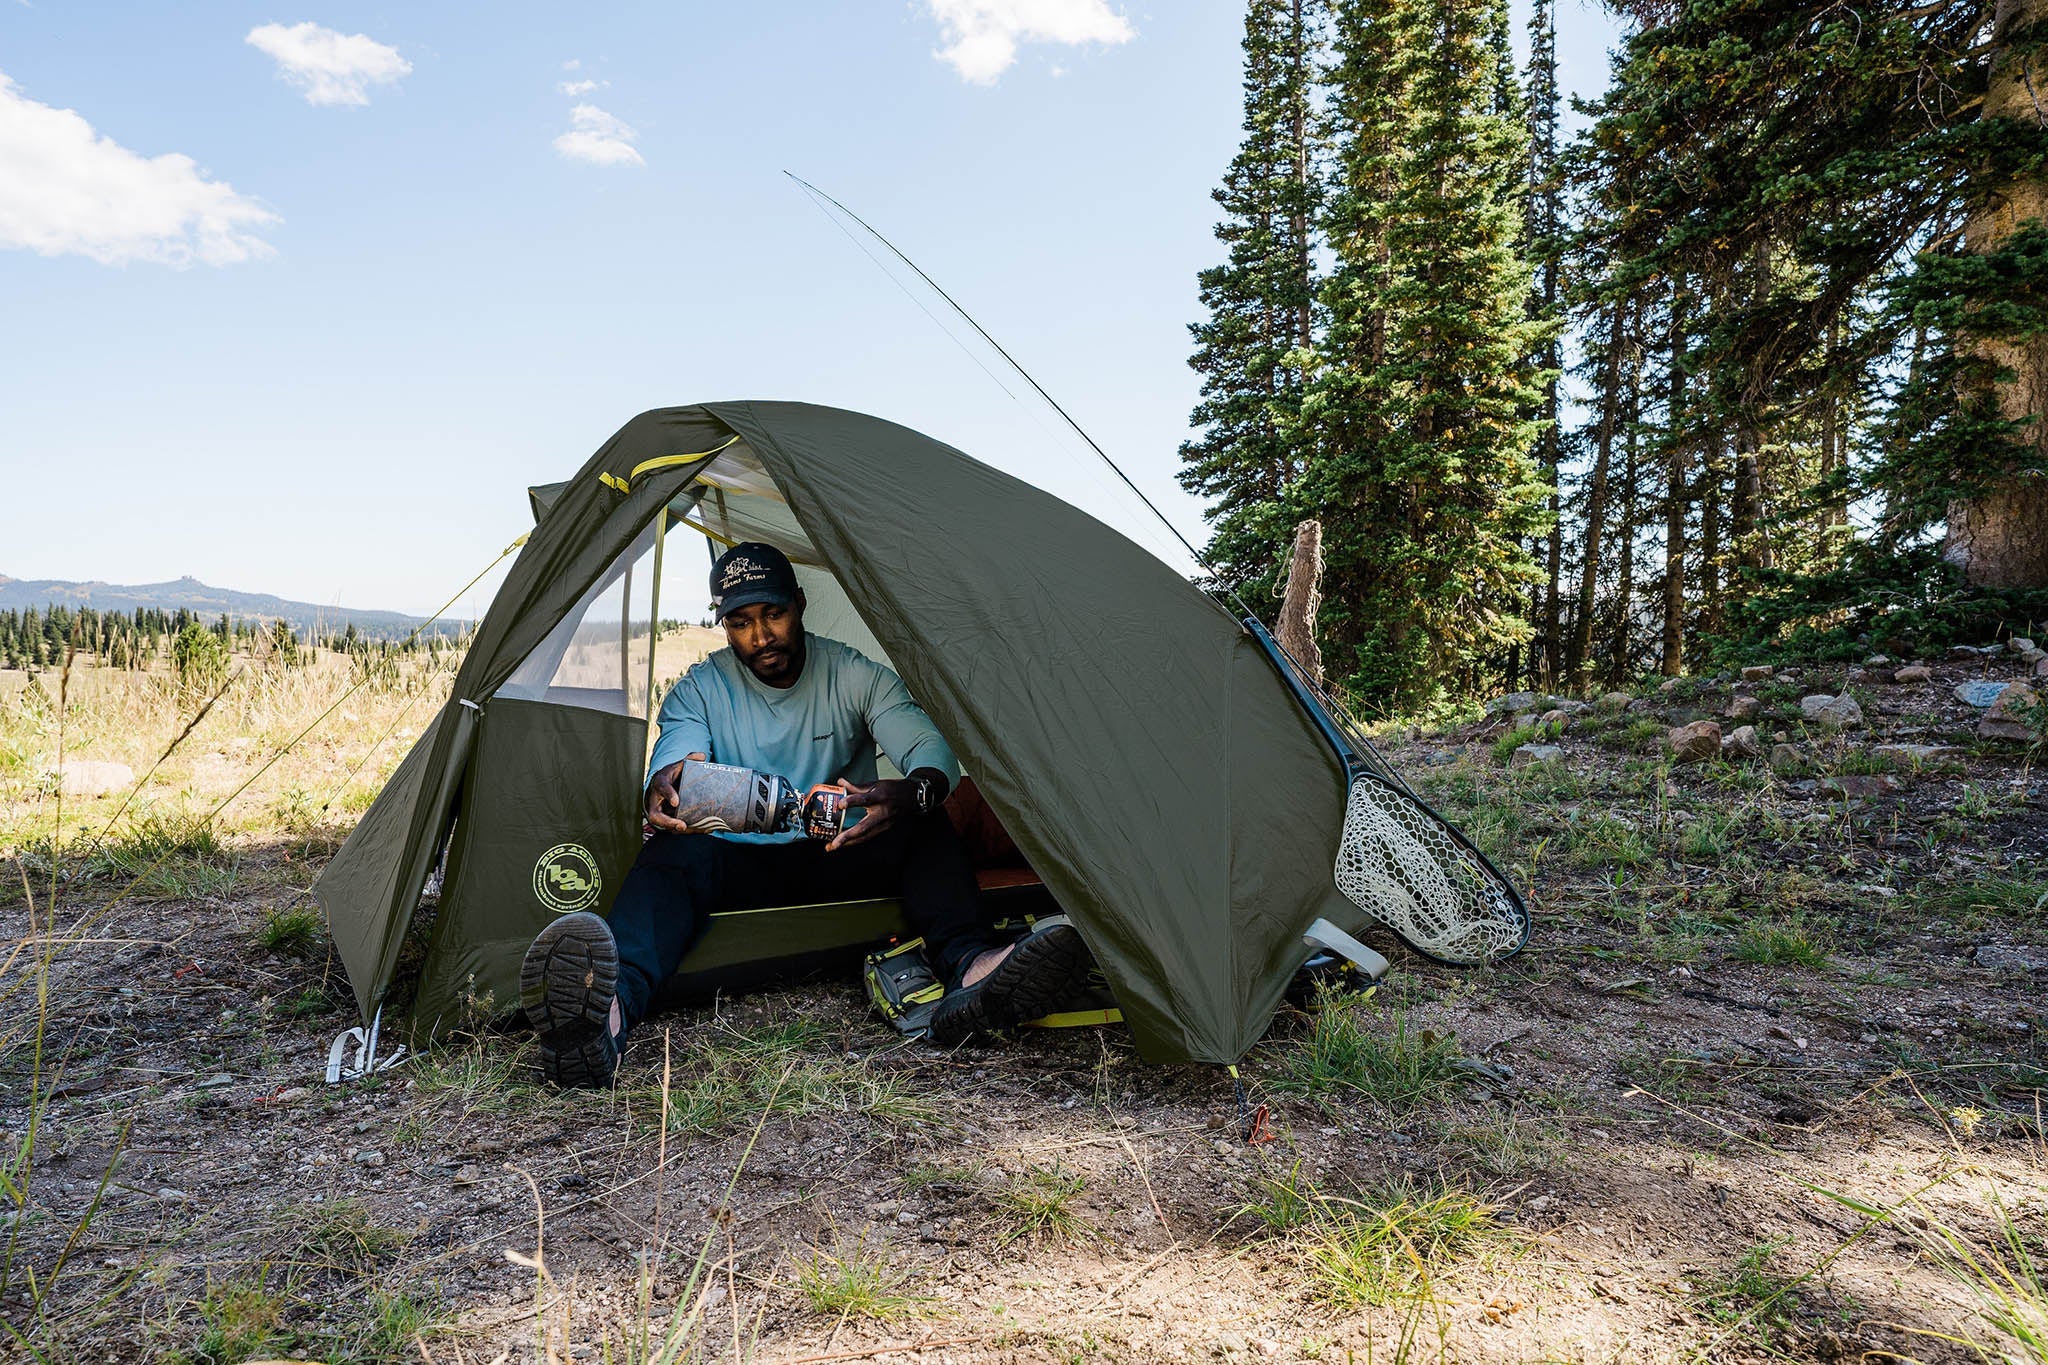 Our Big Agnes Tent Guide - How to Select the Perfect Tent?